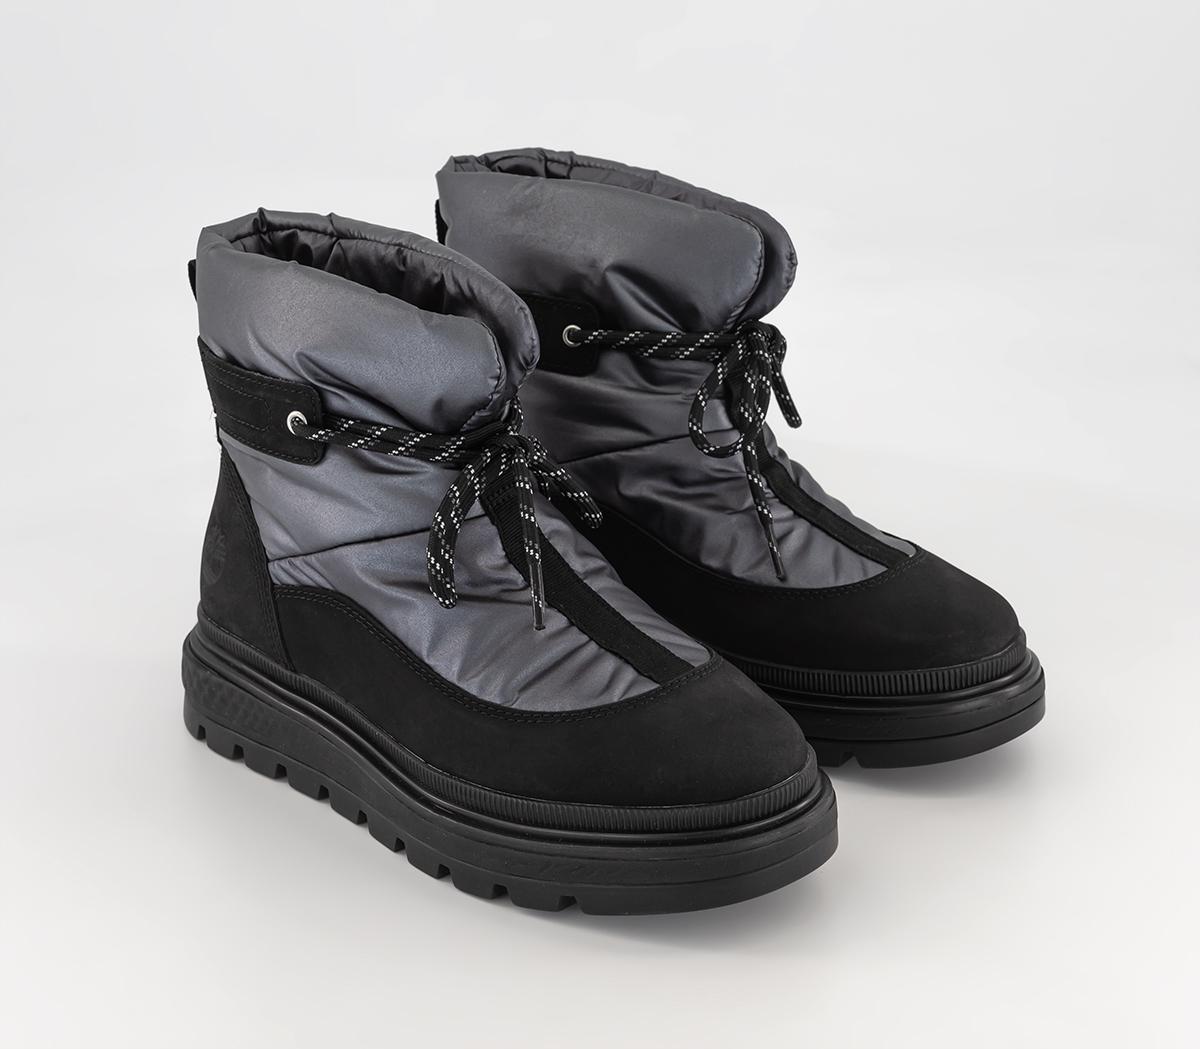 Timberland Ray City Puffer Boots Black - Women's Ankle Boots